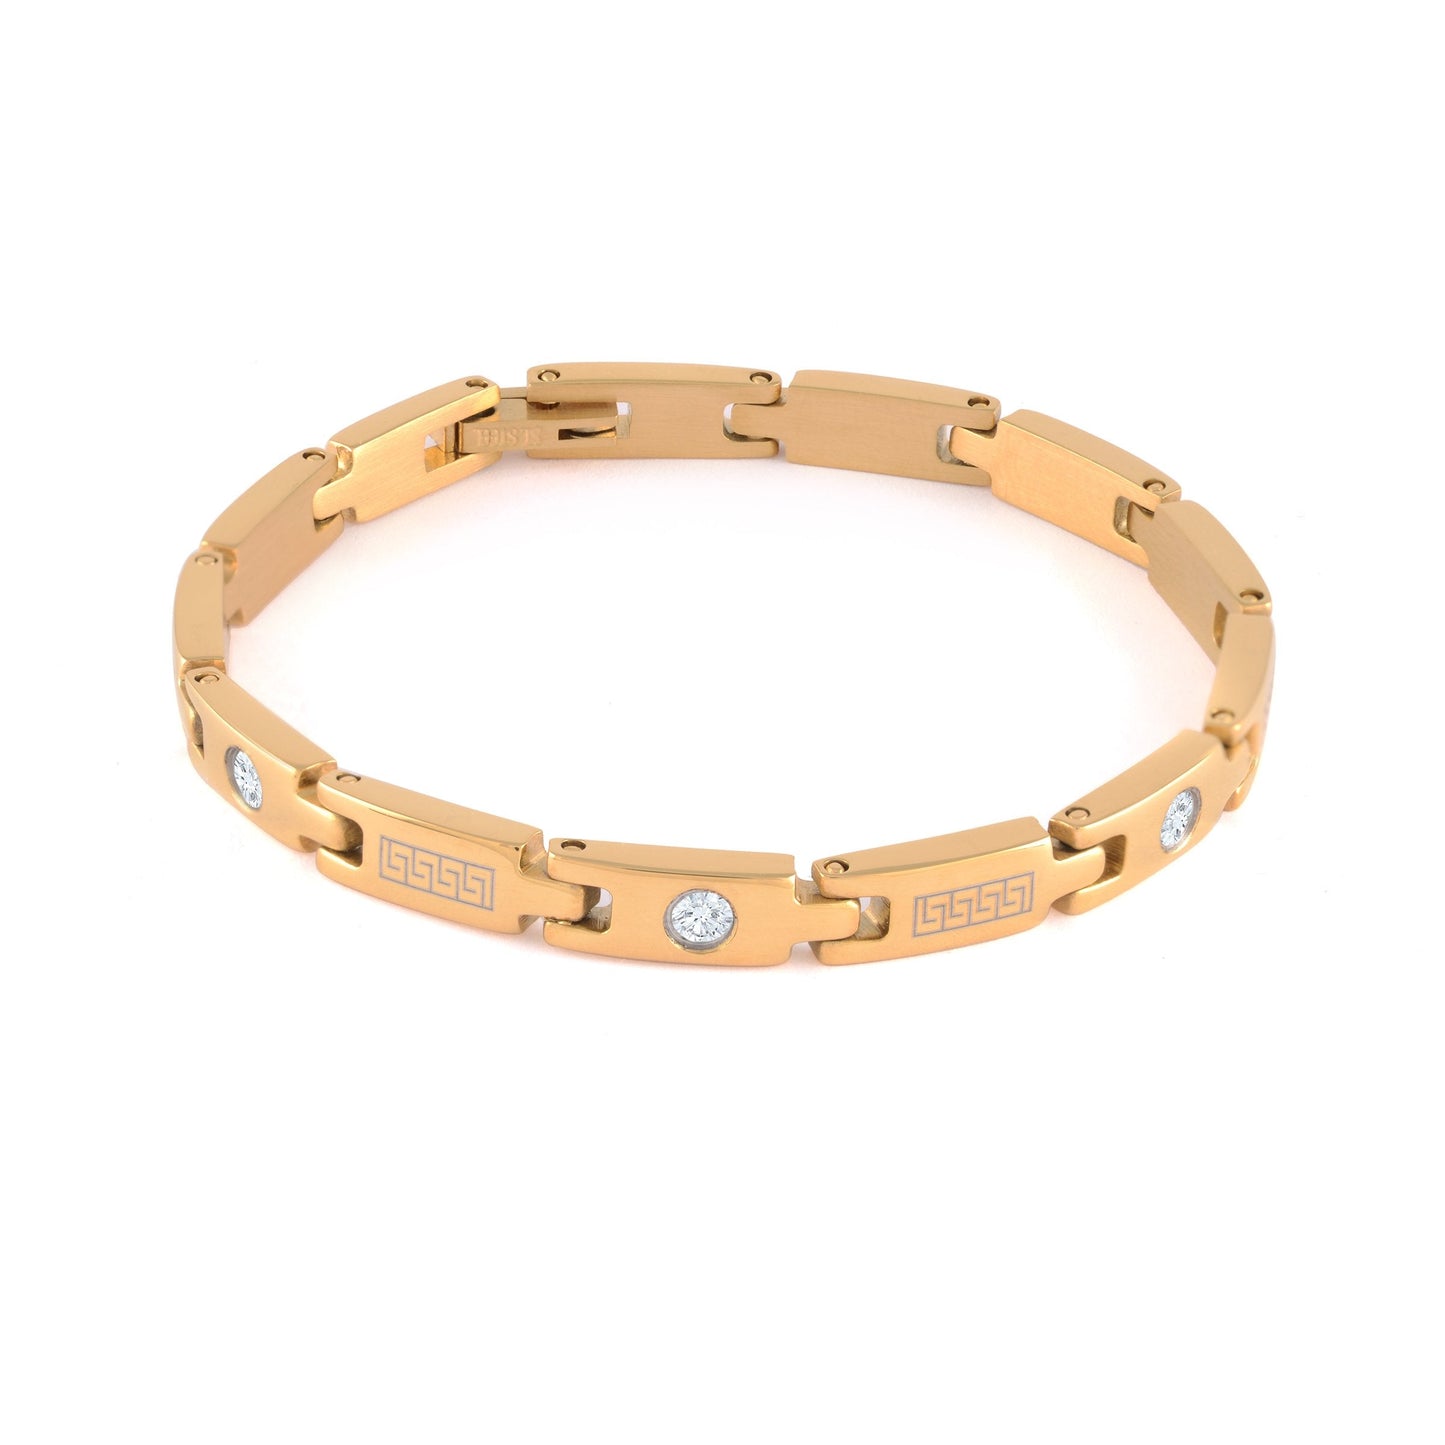 Gold Ion-Plated Stainless Steel Bracelet